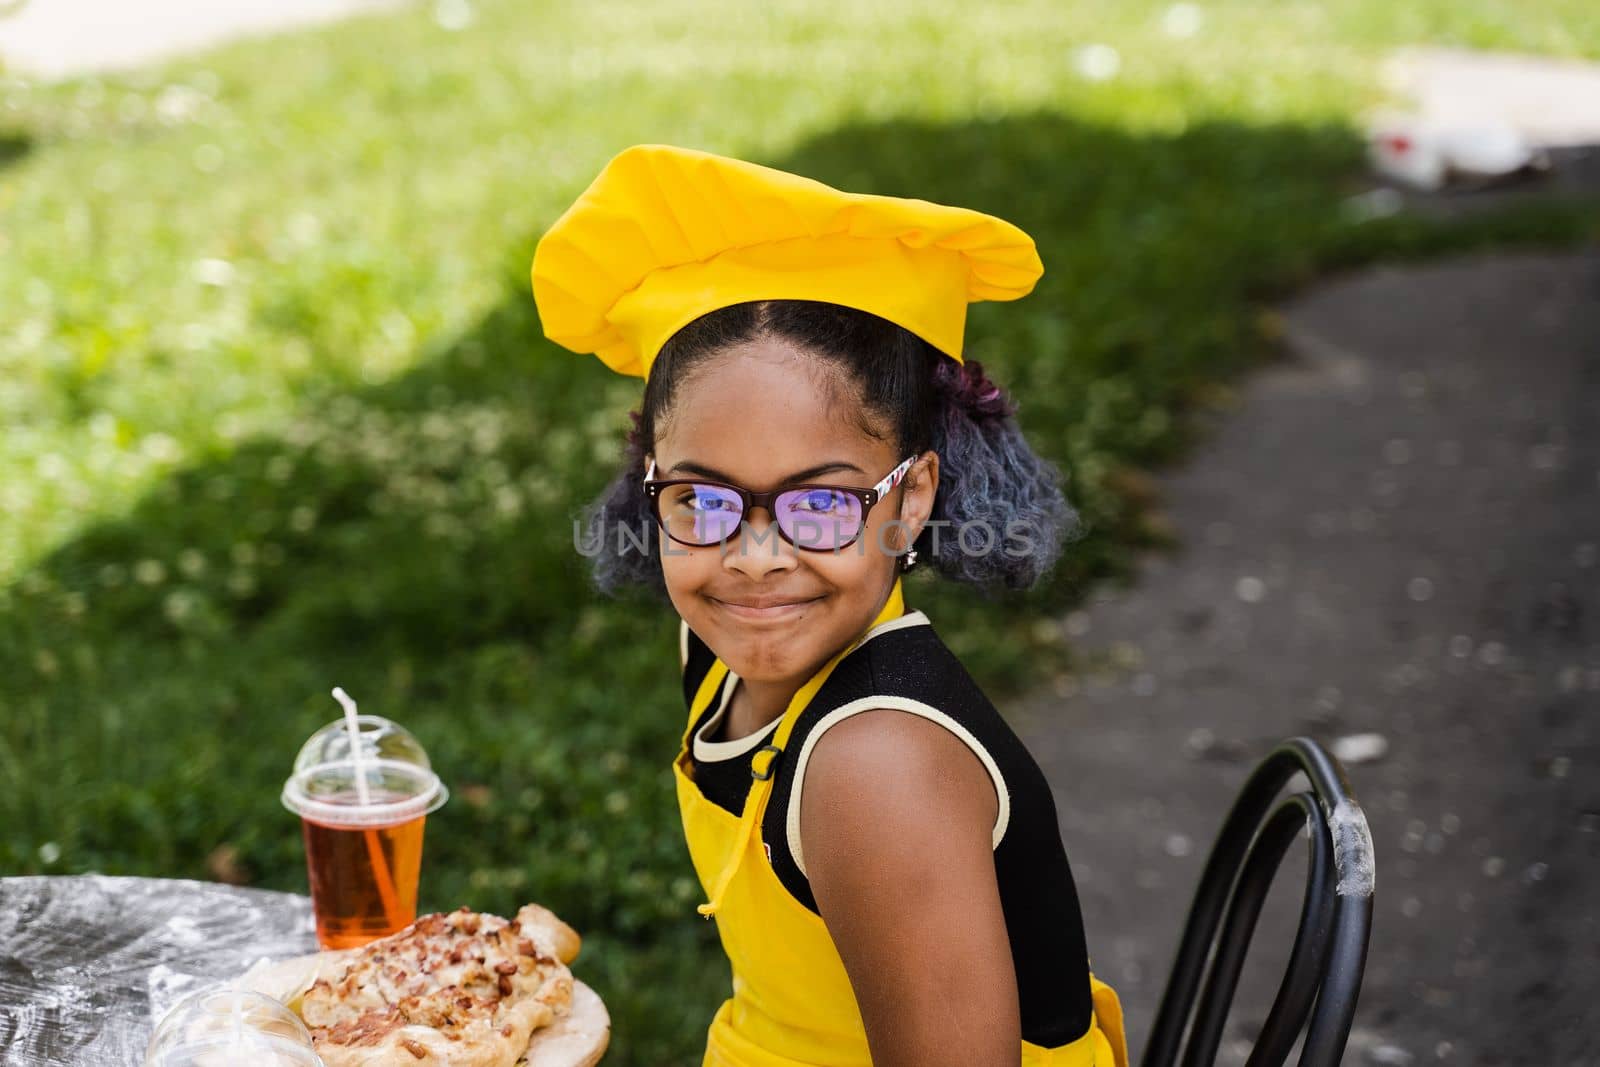 Black african cook child girl sin chefs hat and yellow apron uniform smiling outdoor. by Rabizo